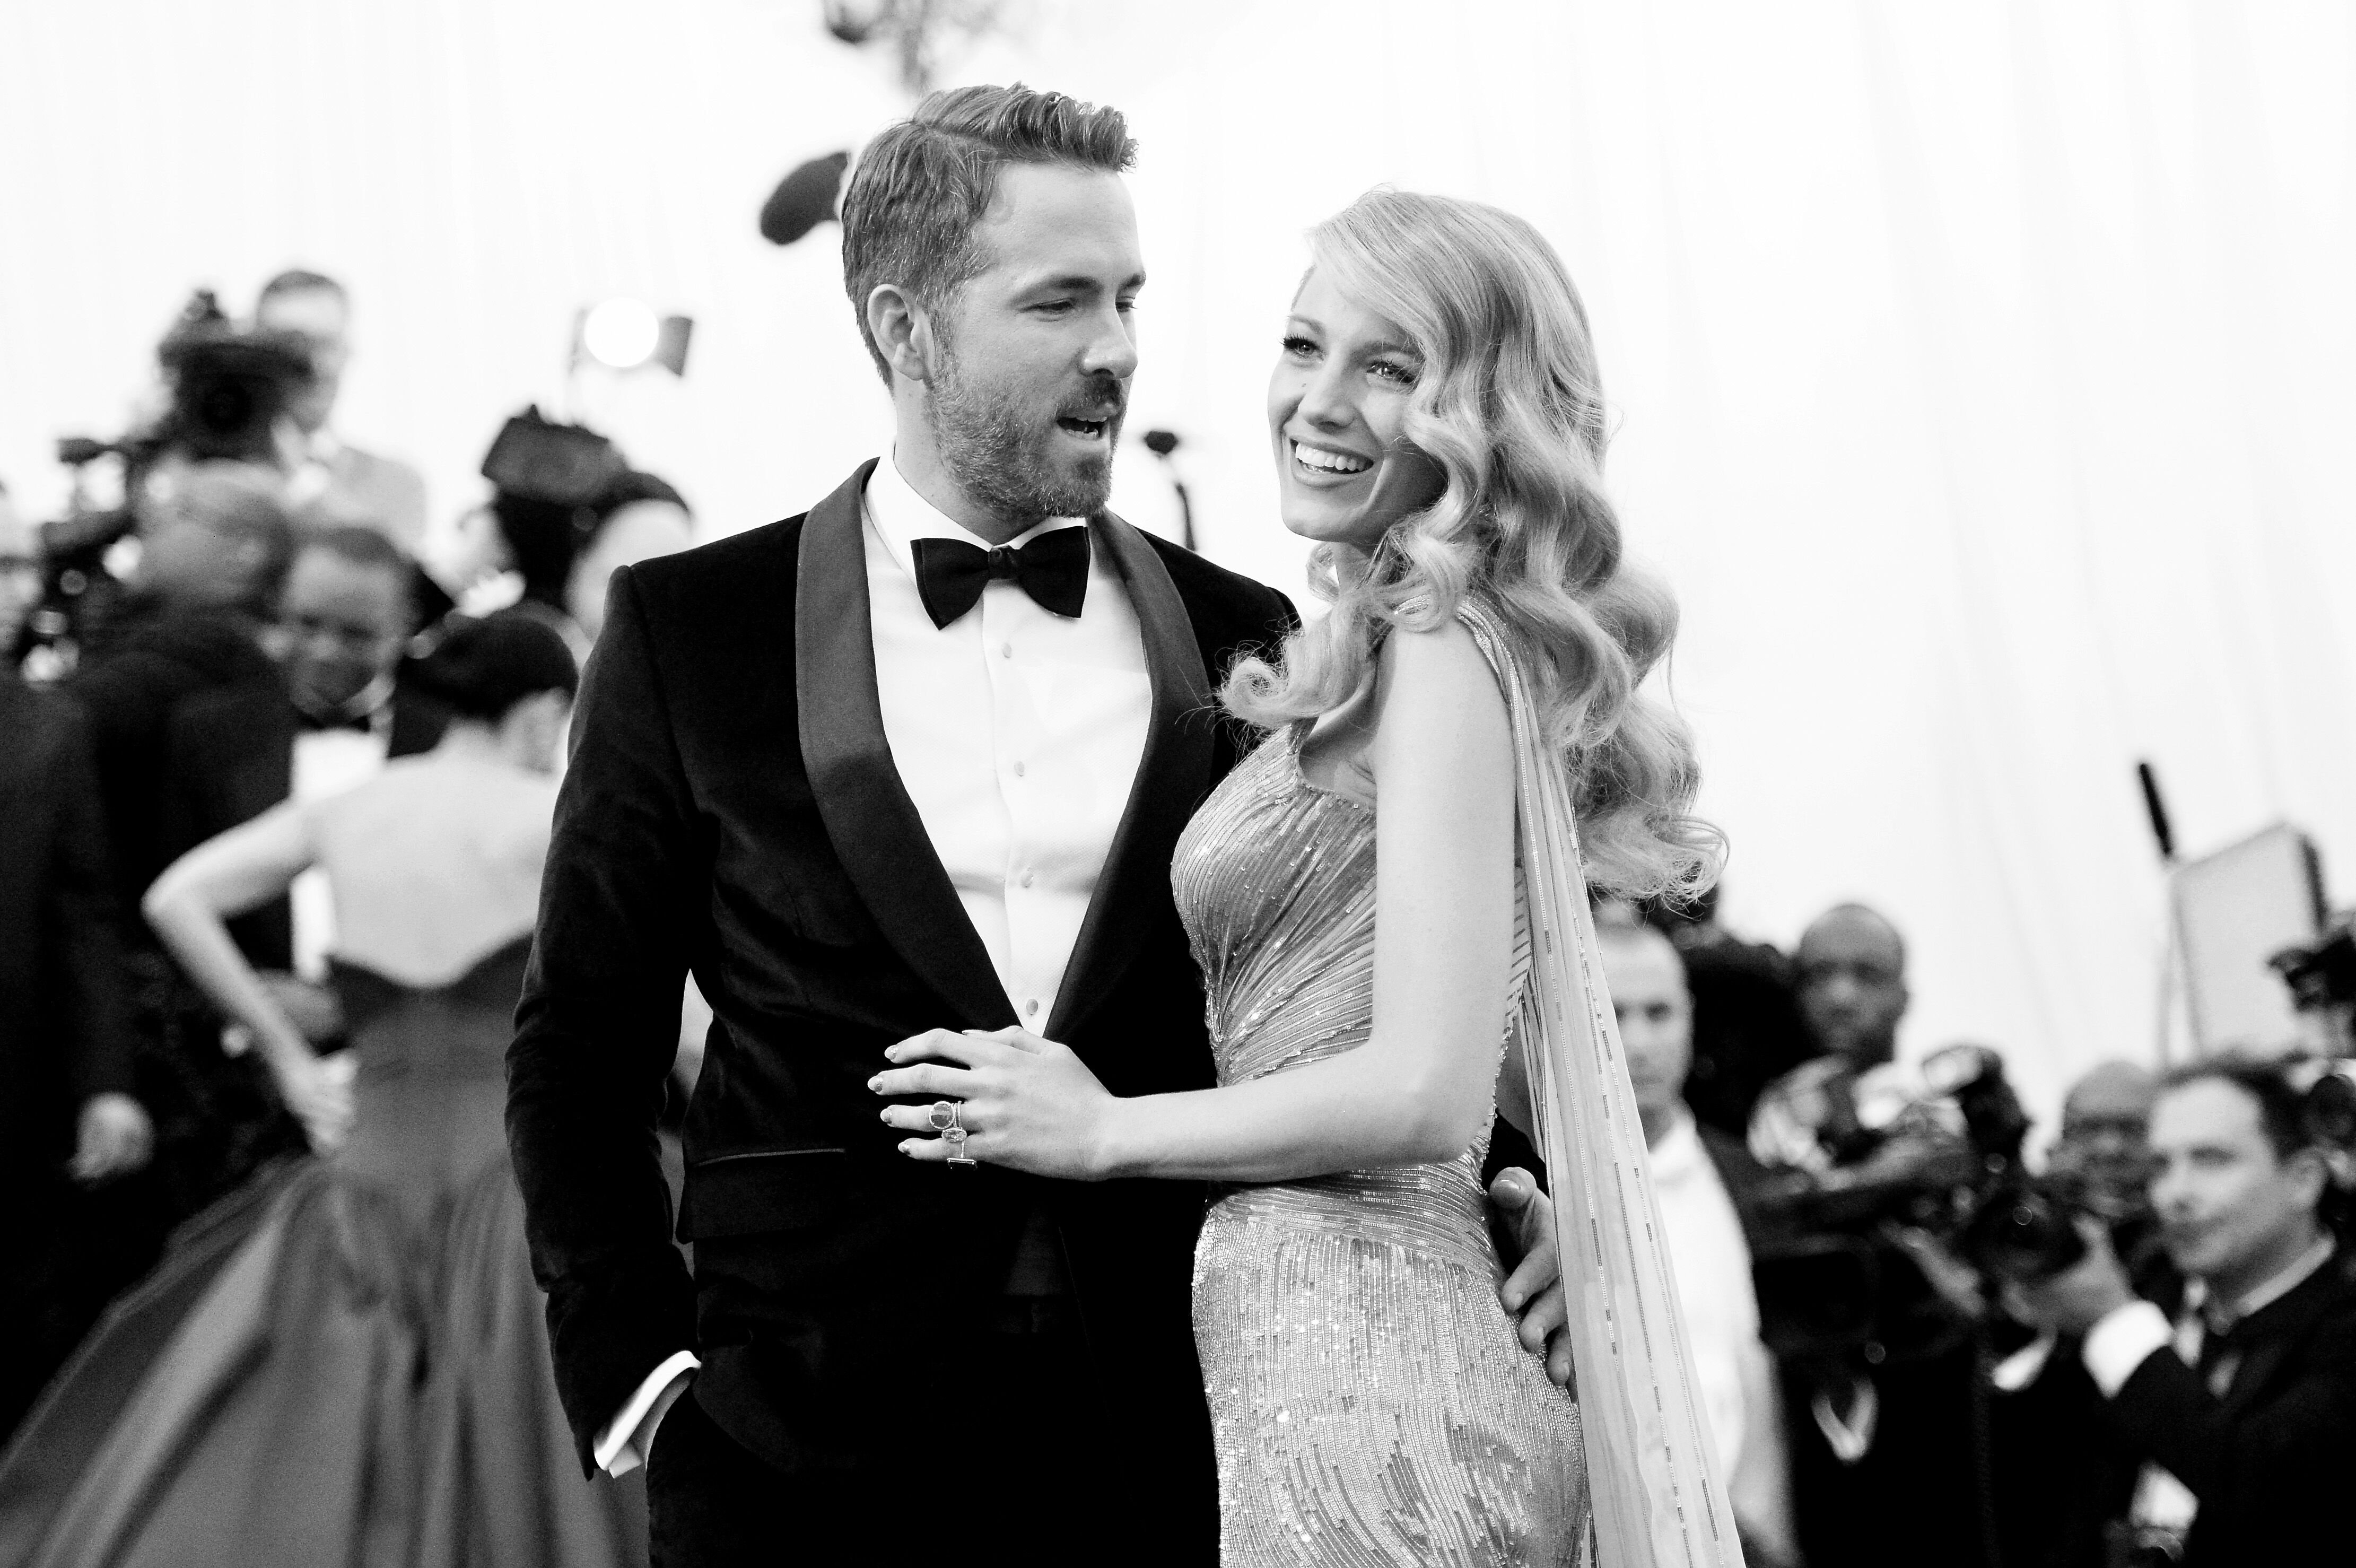 Ryan Reynolds and Blake Lively attend the "Charles James: Beyond Fashion" Costume Institute Gala. | Source: Getty Images